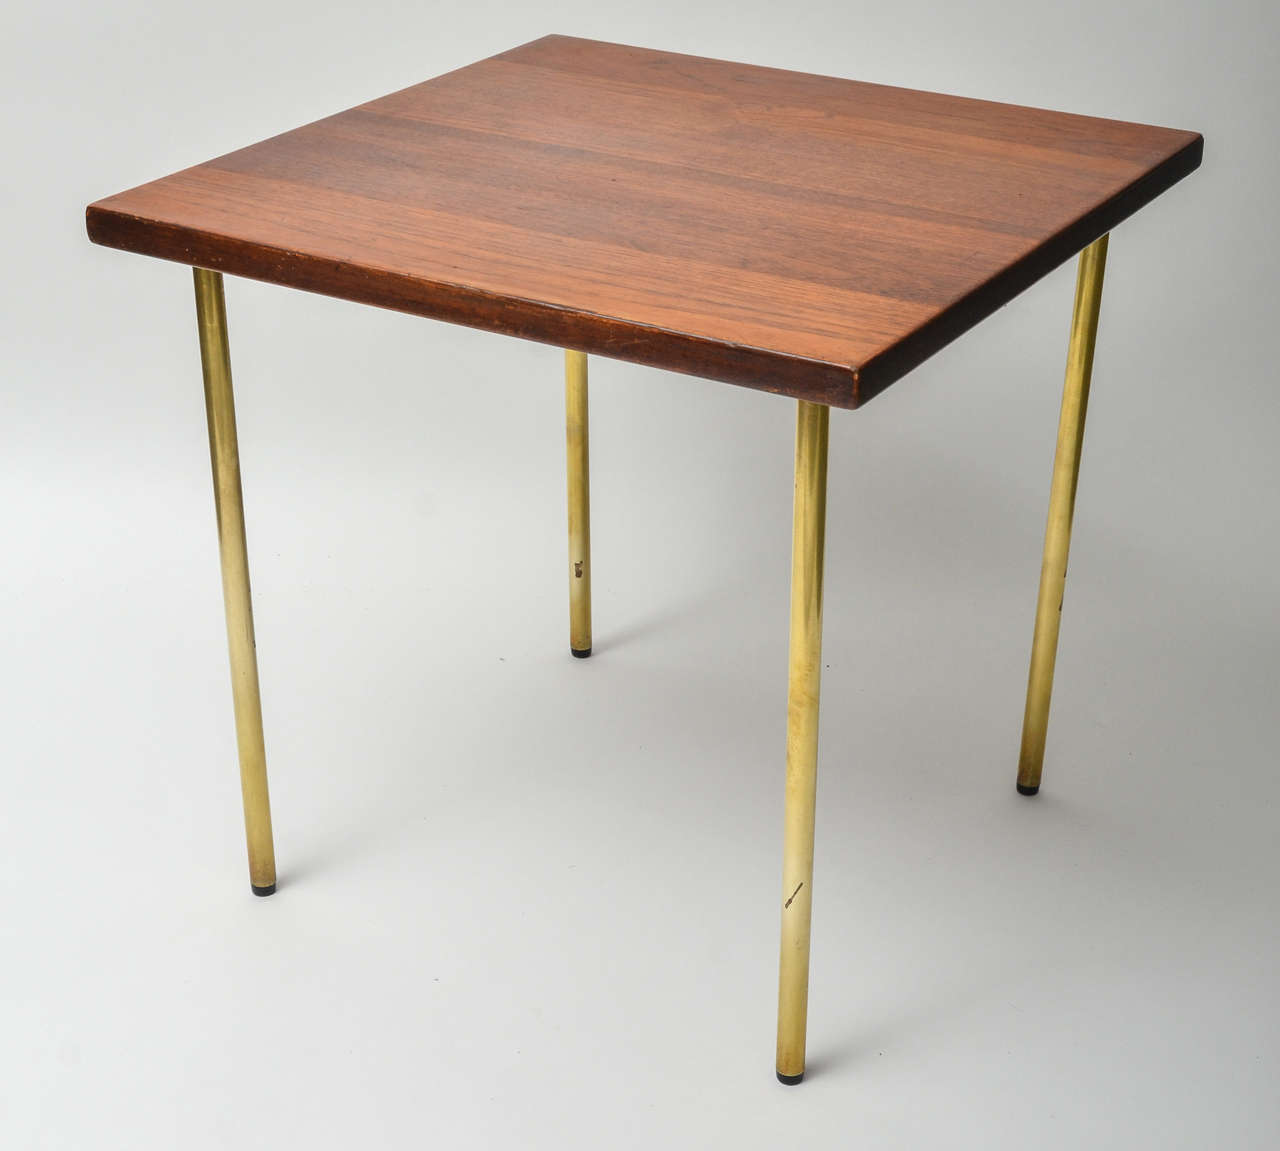 Square form, solid teak Danish side table with screw-in brass legs.
Manufactured by France & Son, this useful 